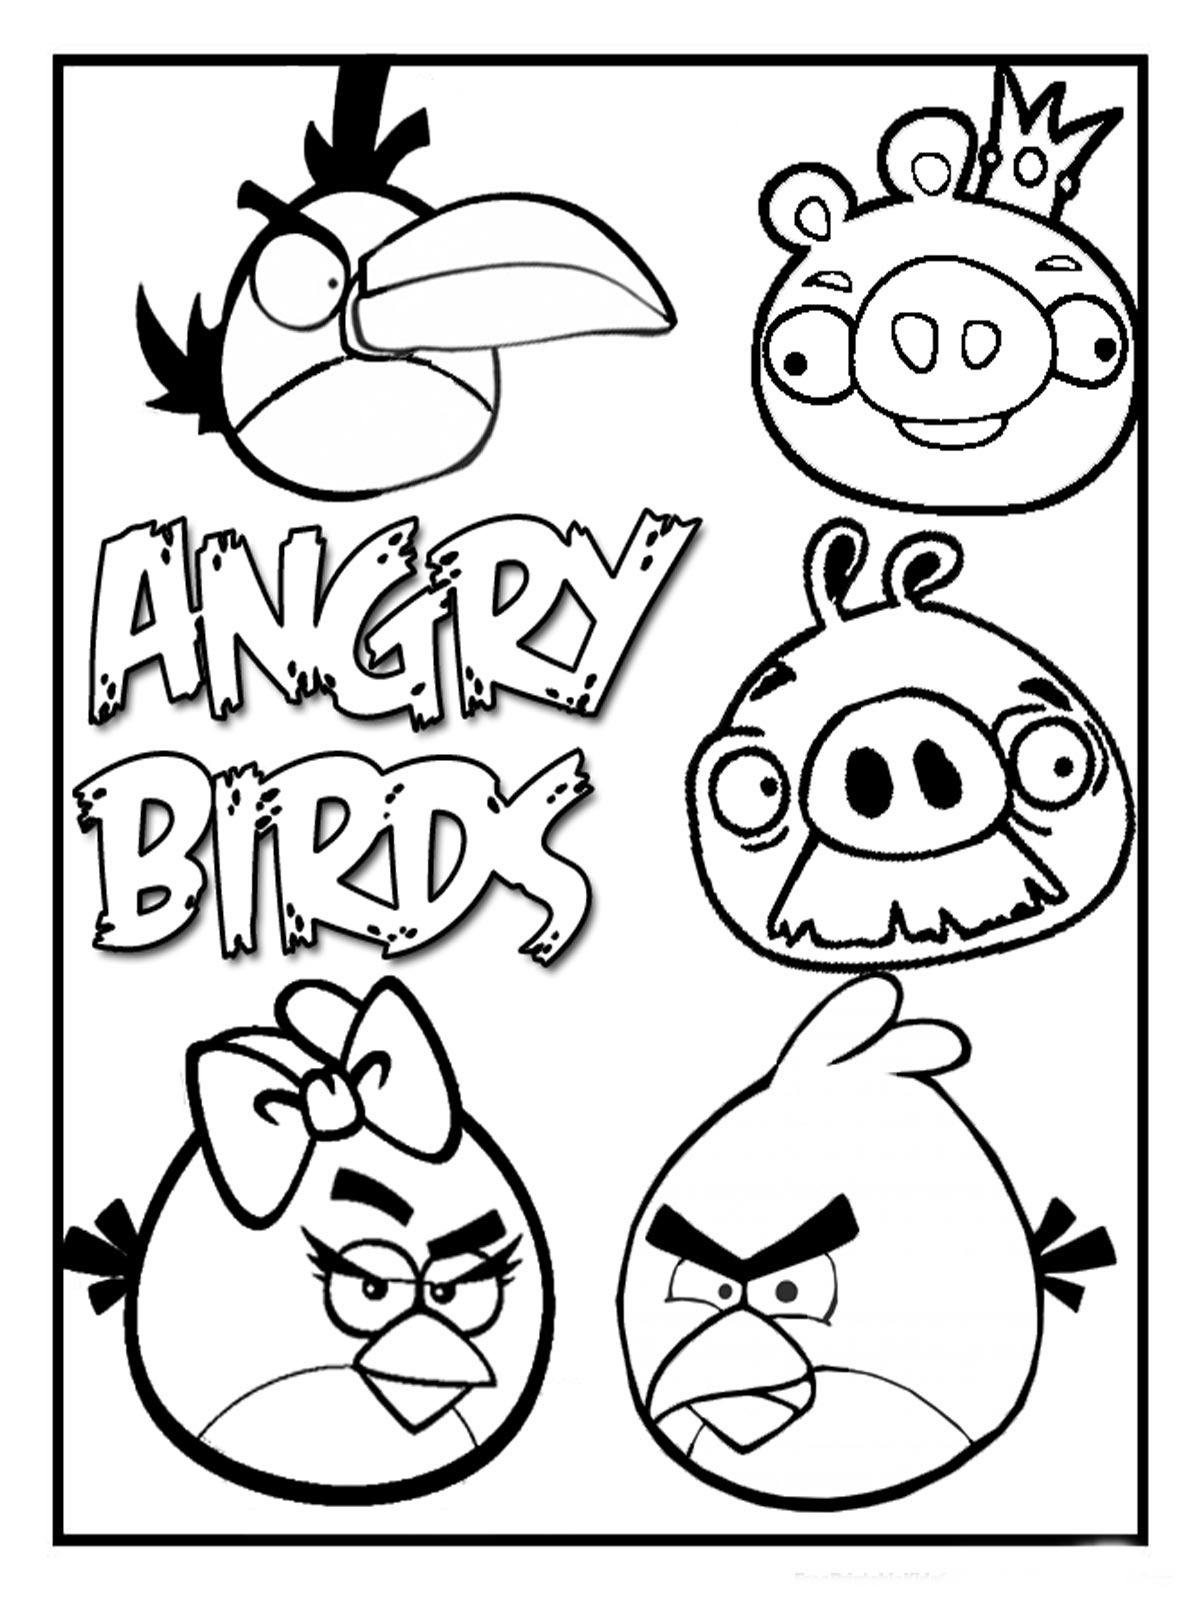 Download Angry Birds: Colouring Pages that You Can Use as Templates ...